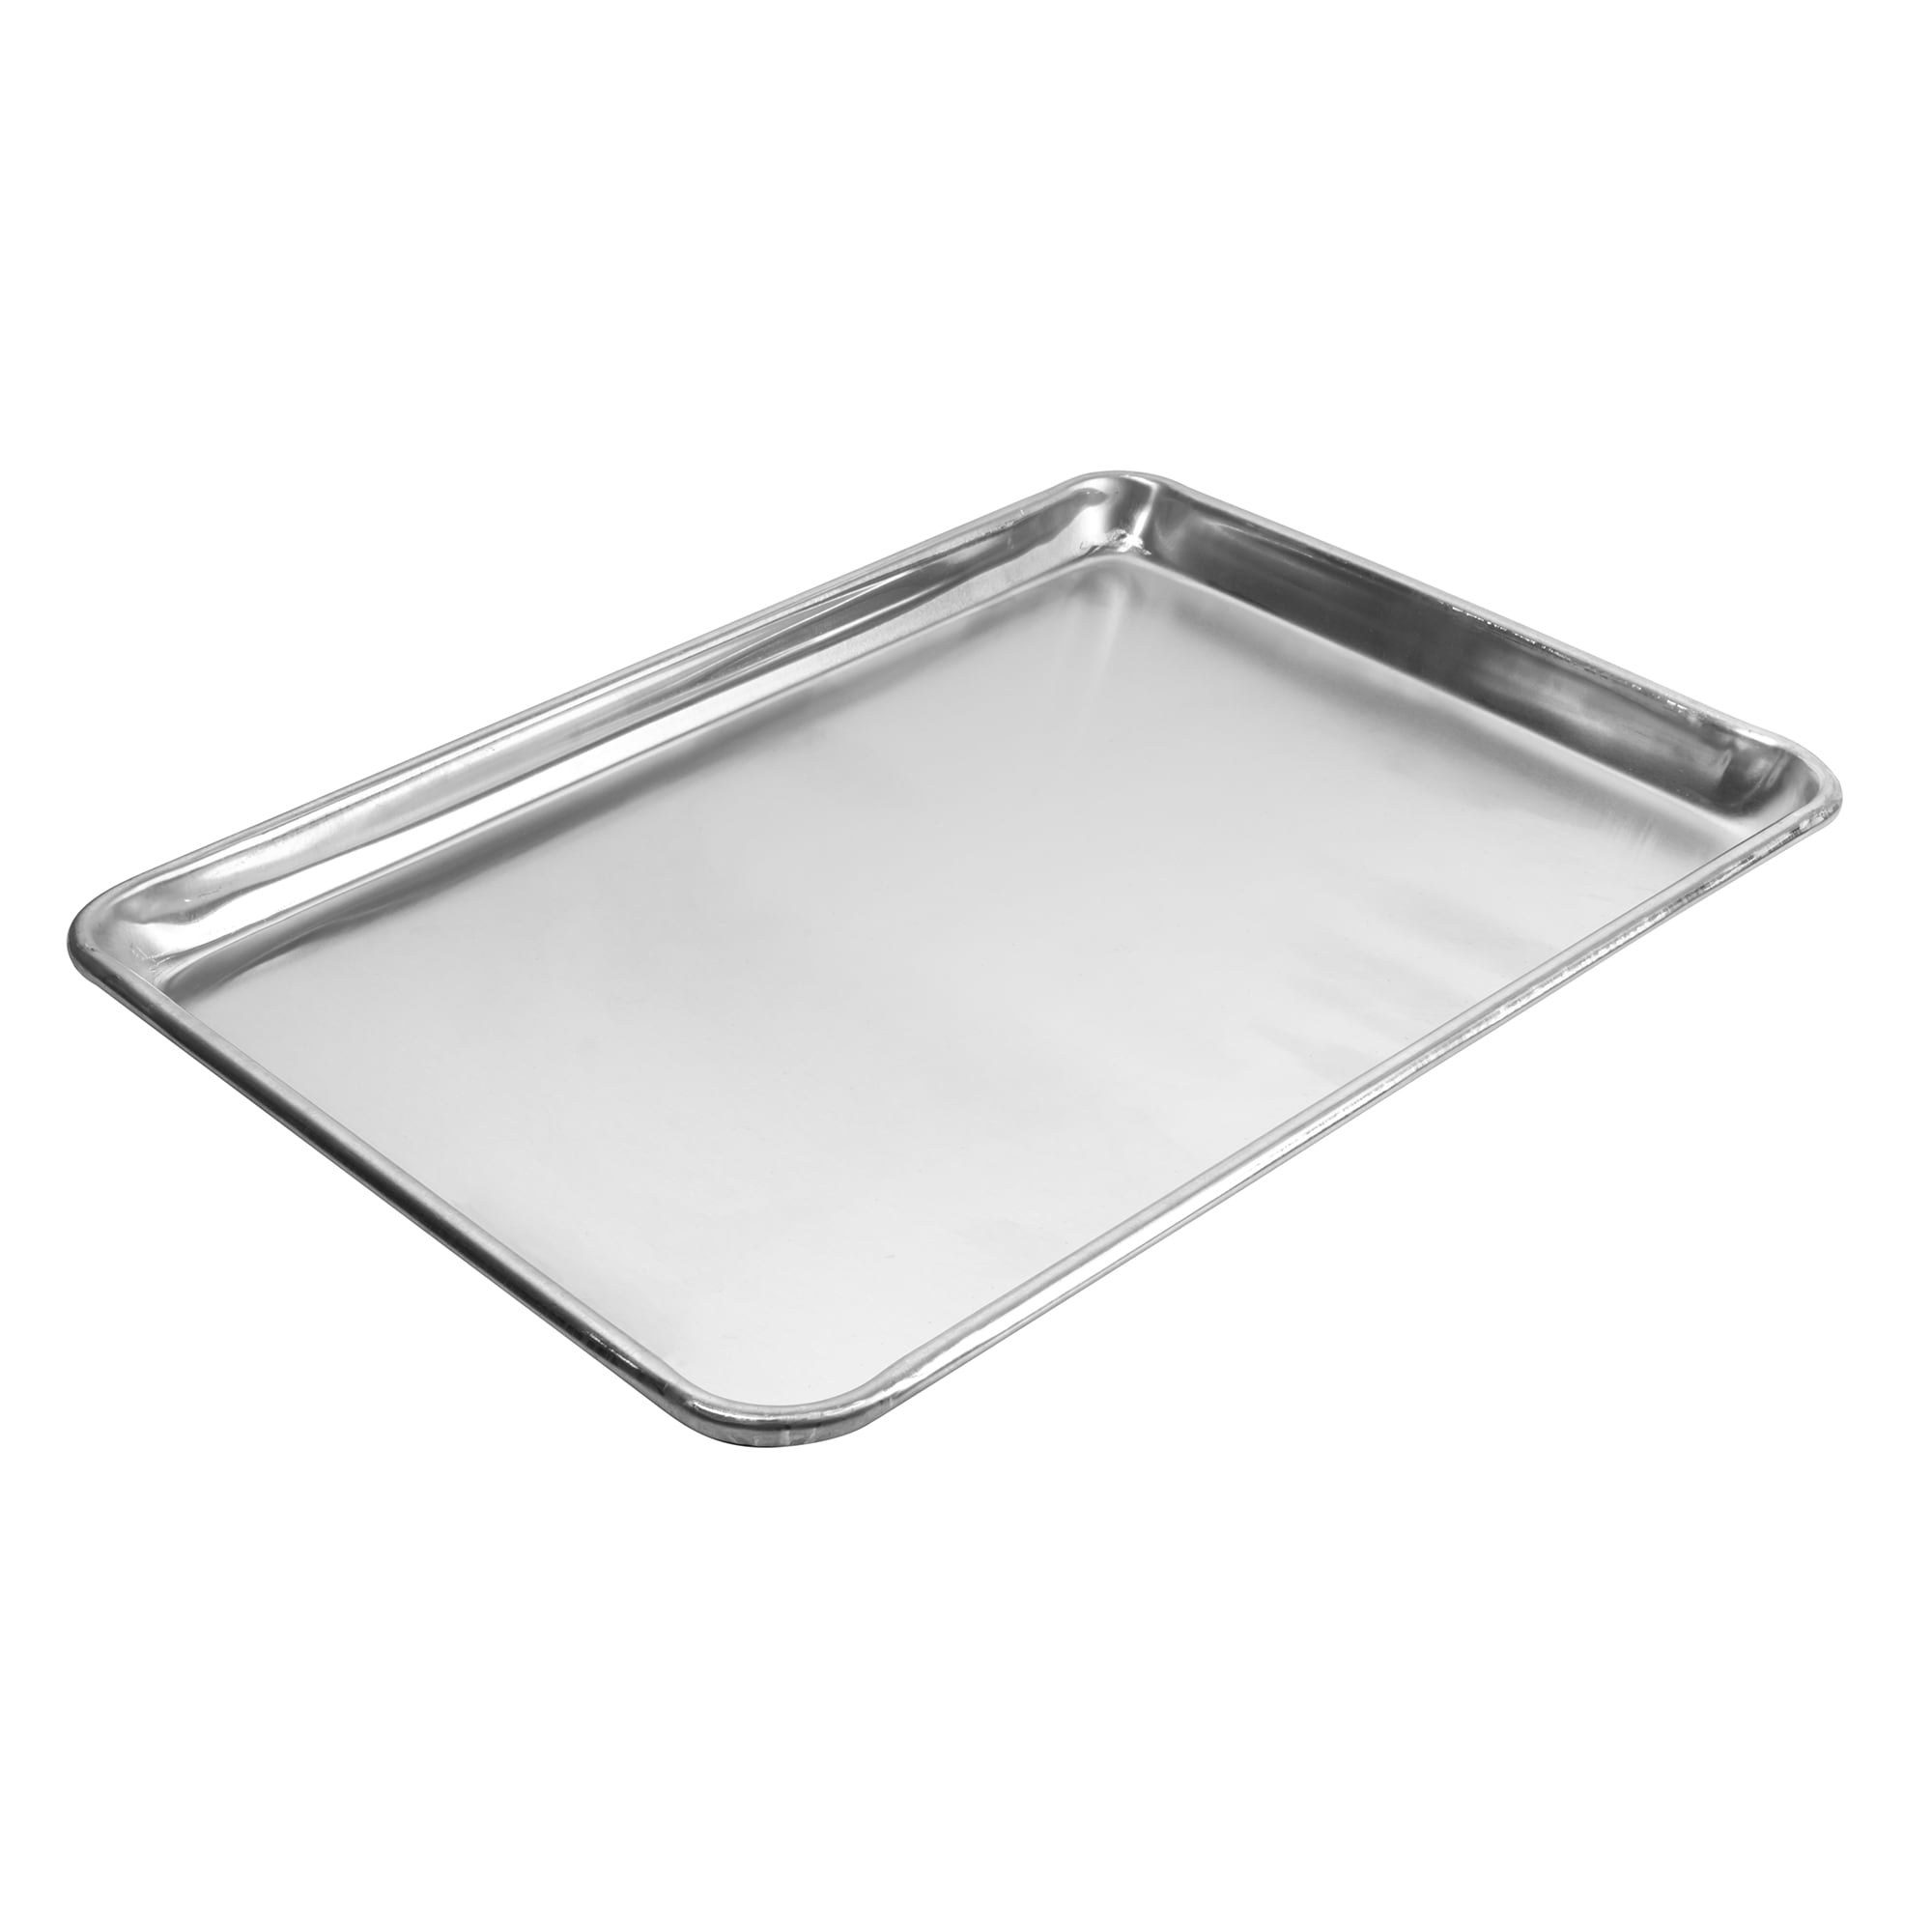 Thunder Group 18x26 Inch Full Size Aluminum Sheet Pan Perforated New